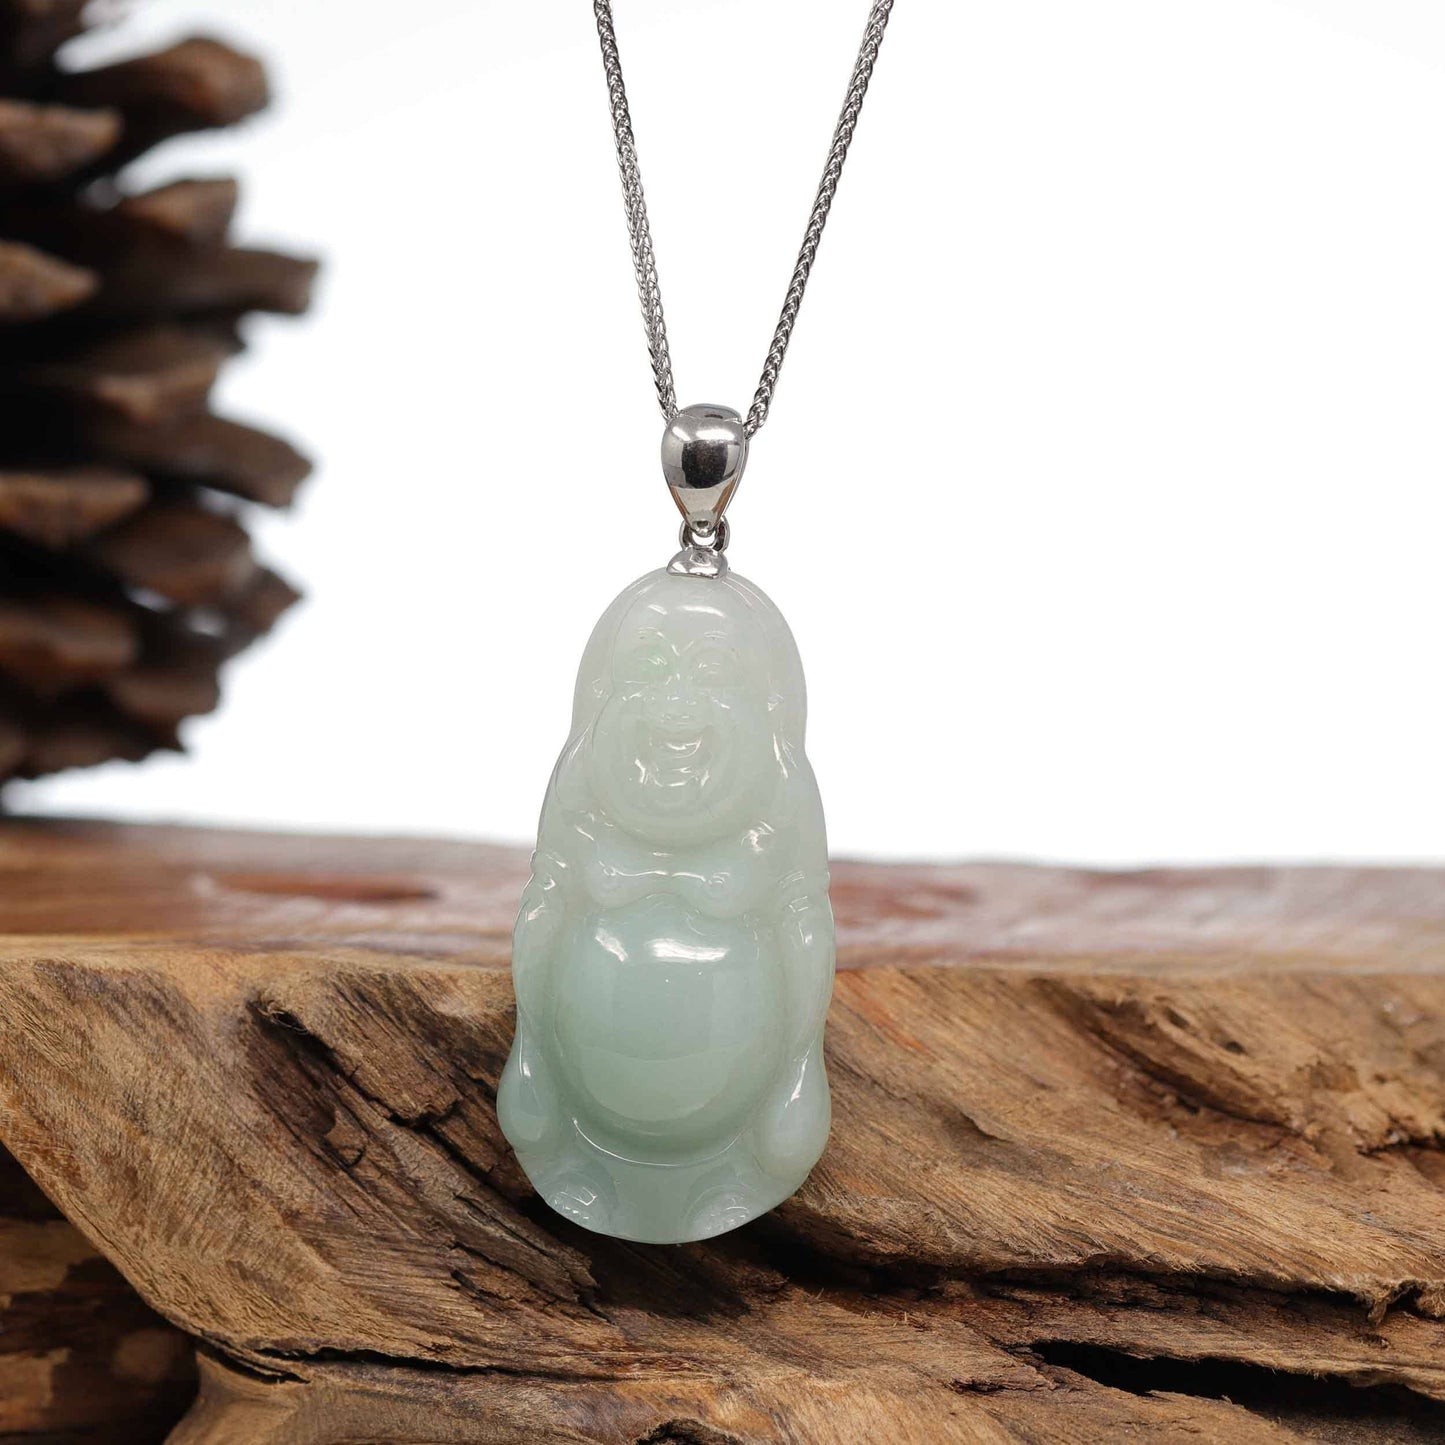 Jade Buddha Pendant Necklace W/ 18K Gold Plated Crystal Charm Jewelry Chain  Hip Hop Style - Etsy | Buddha pendant necklace, Buddha pendant, Pearl pendant  necklace